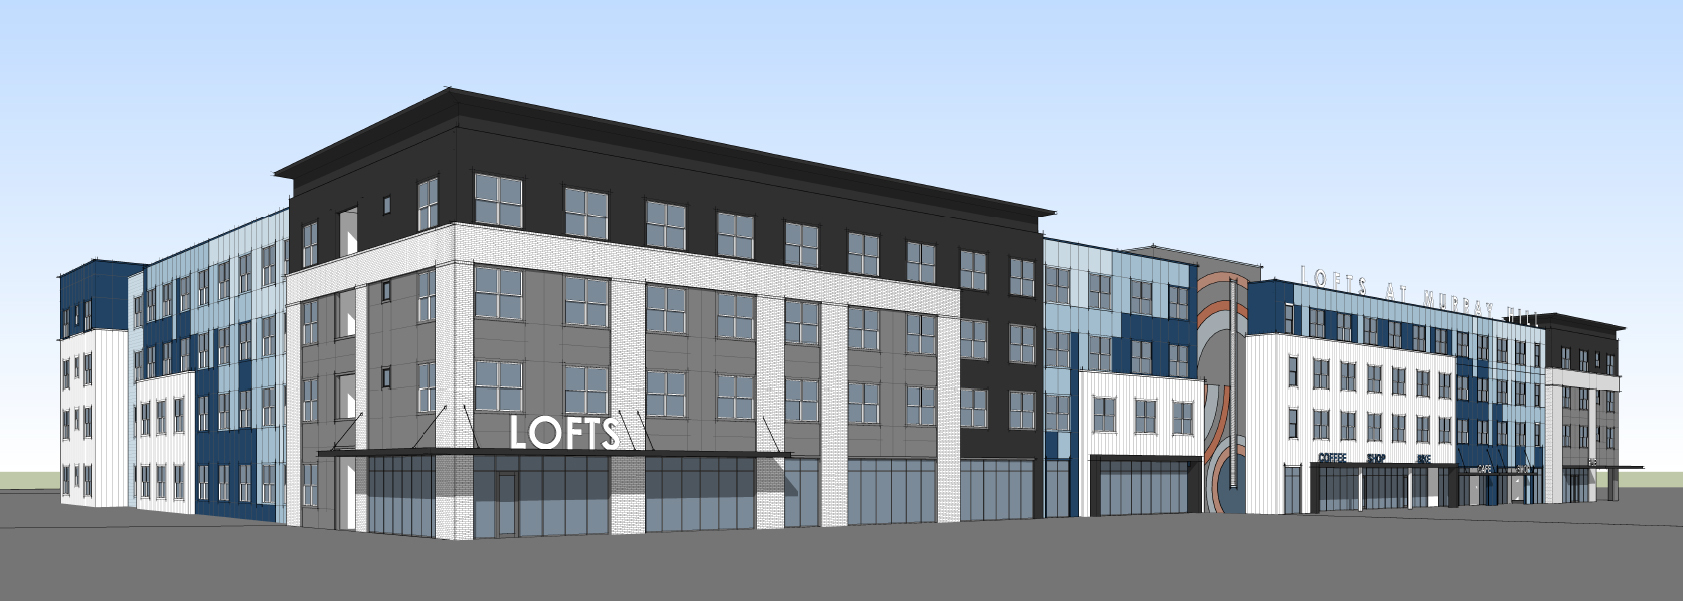 The Lofts at Murray Hill will have 117 apartments.